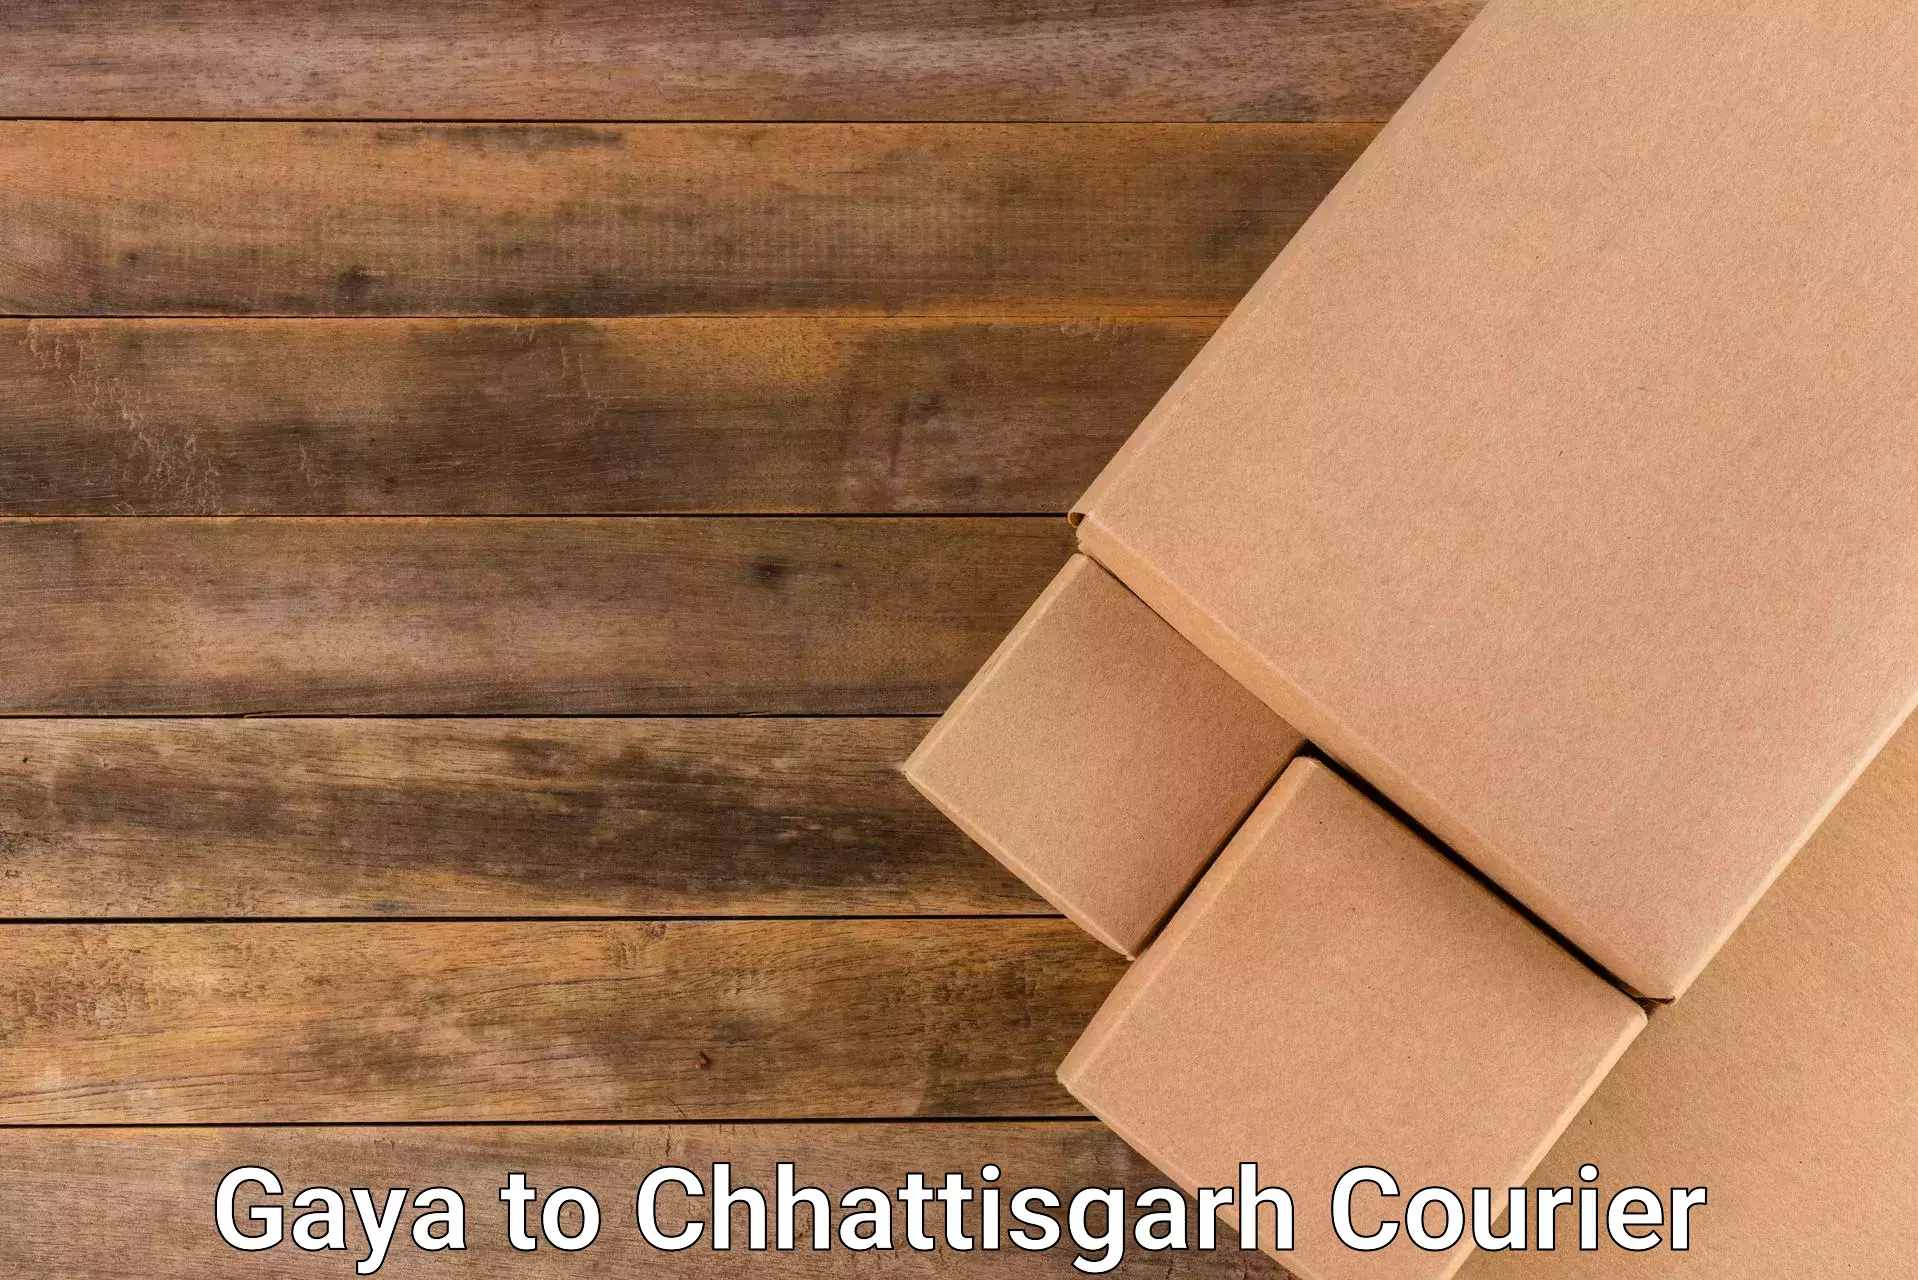 Cost-effective shipping solutions Gaya to Raipur